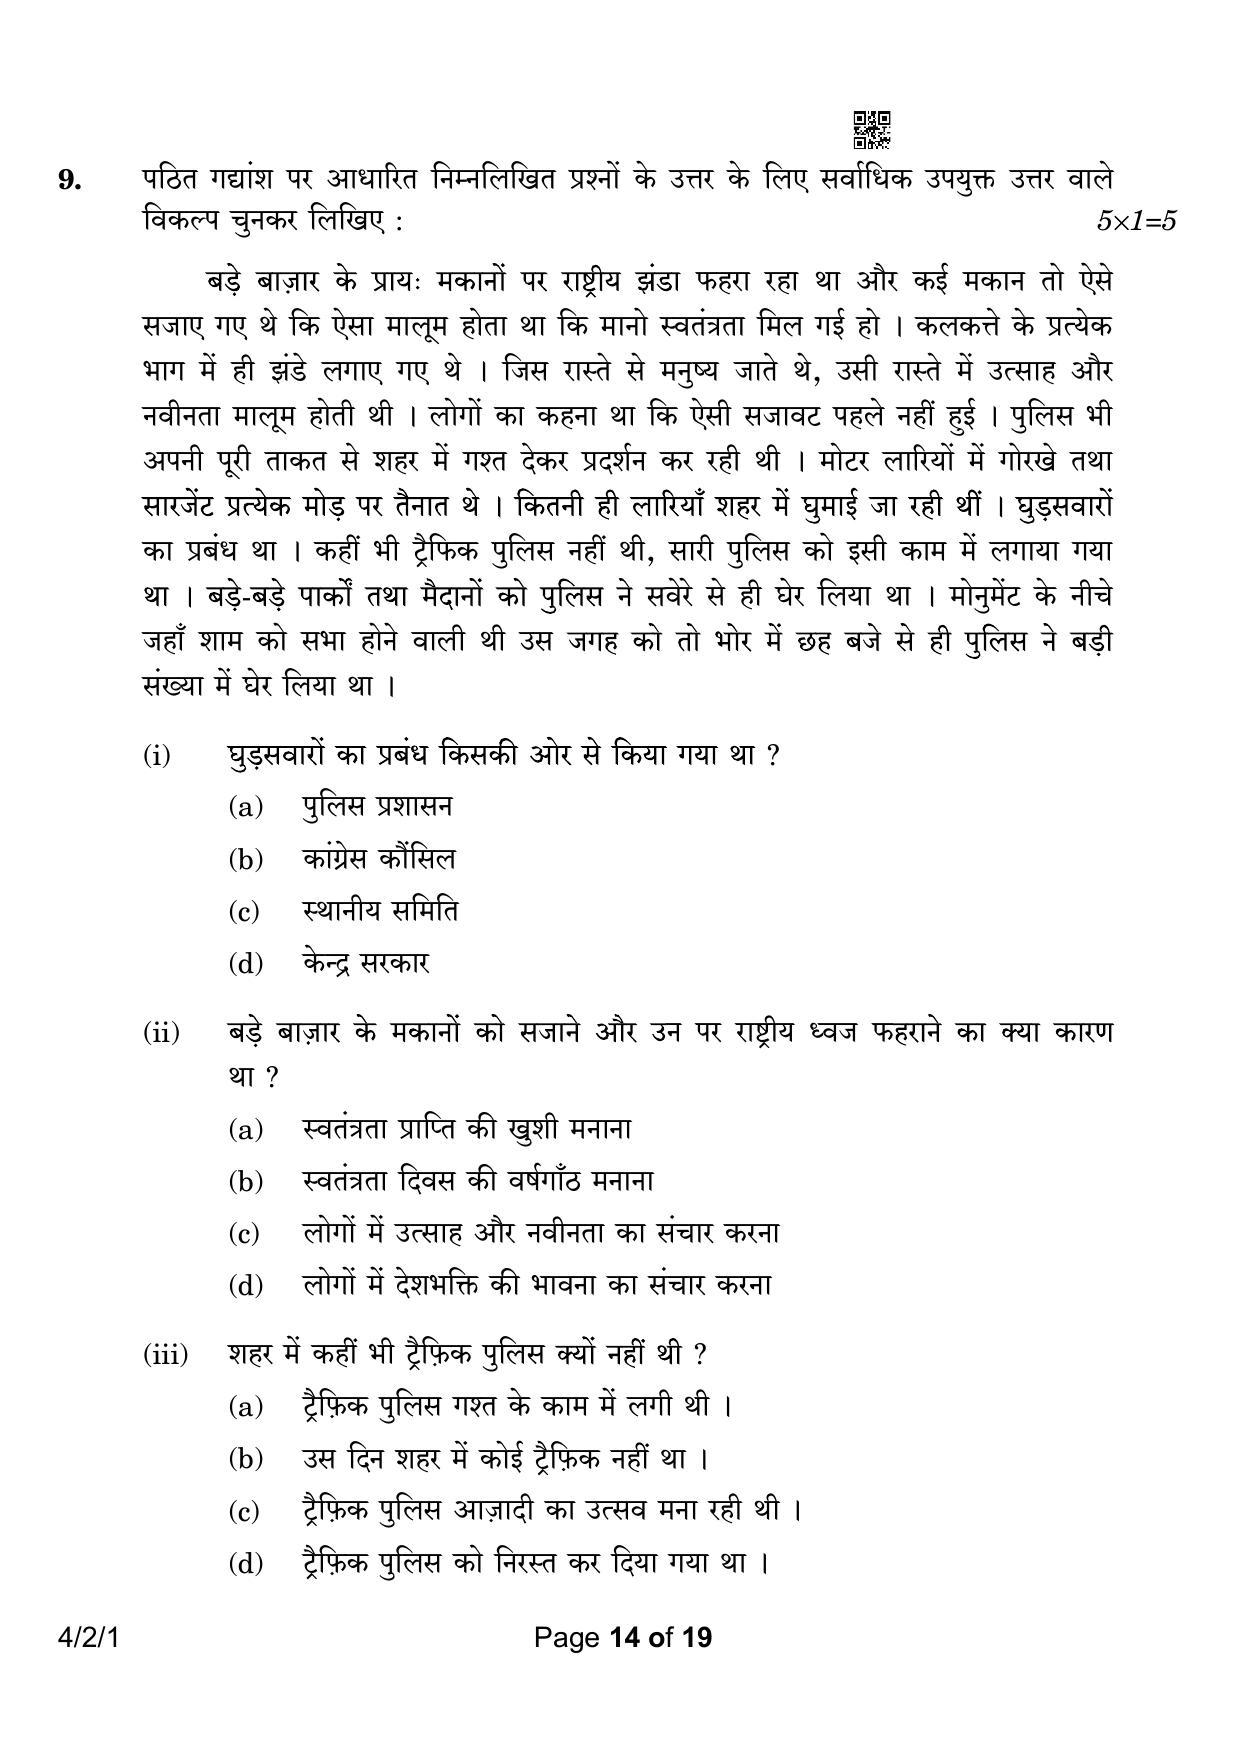 CBSE Class 10 4-2-1 Hindi B 2023 Question Paper - Page 14